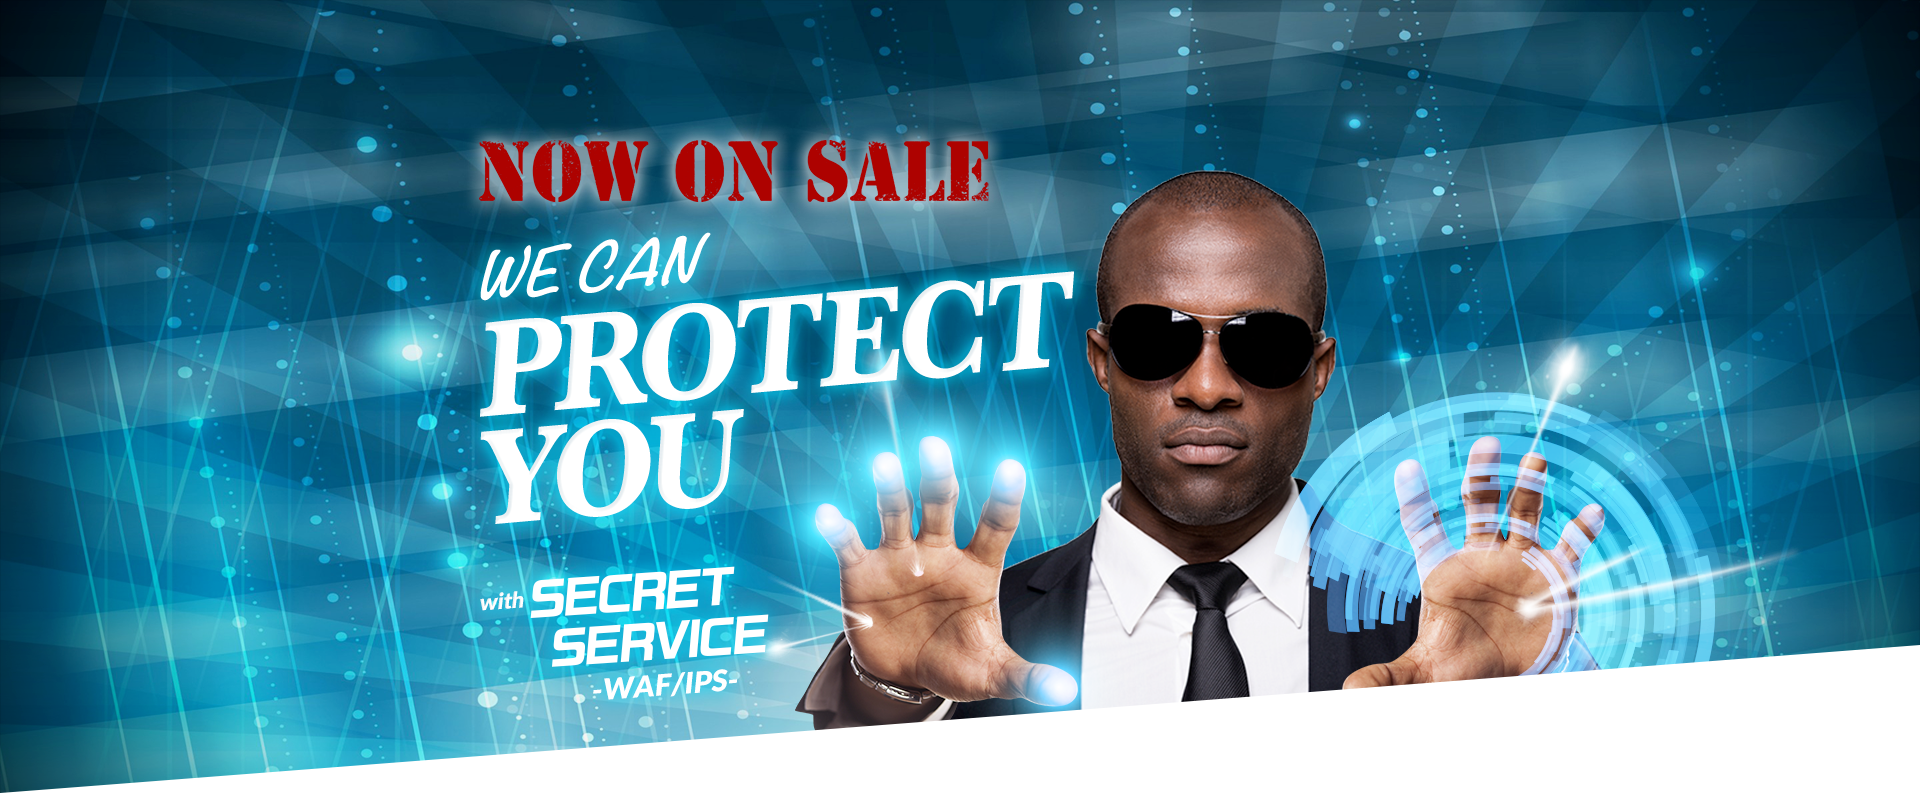 NOW ON SALE! WE CAN PROTECT YOU with シークレットサービス IPS／WAF